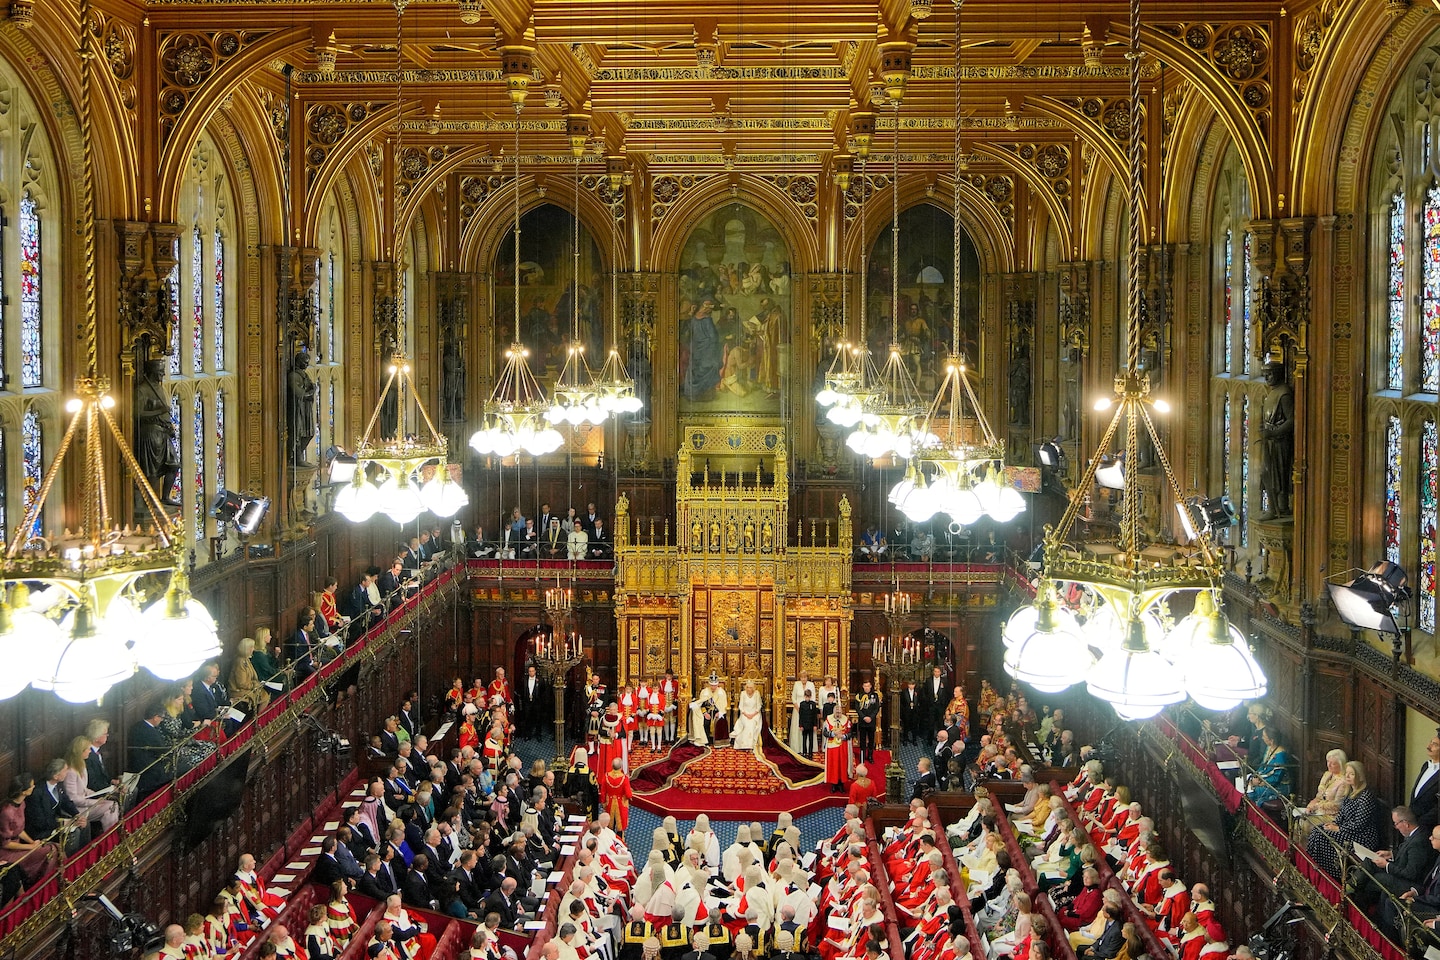 With King’s Speech, new U.K. Labour government defines ‘change’